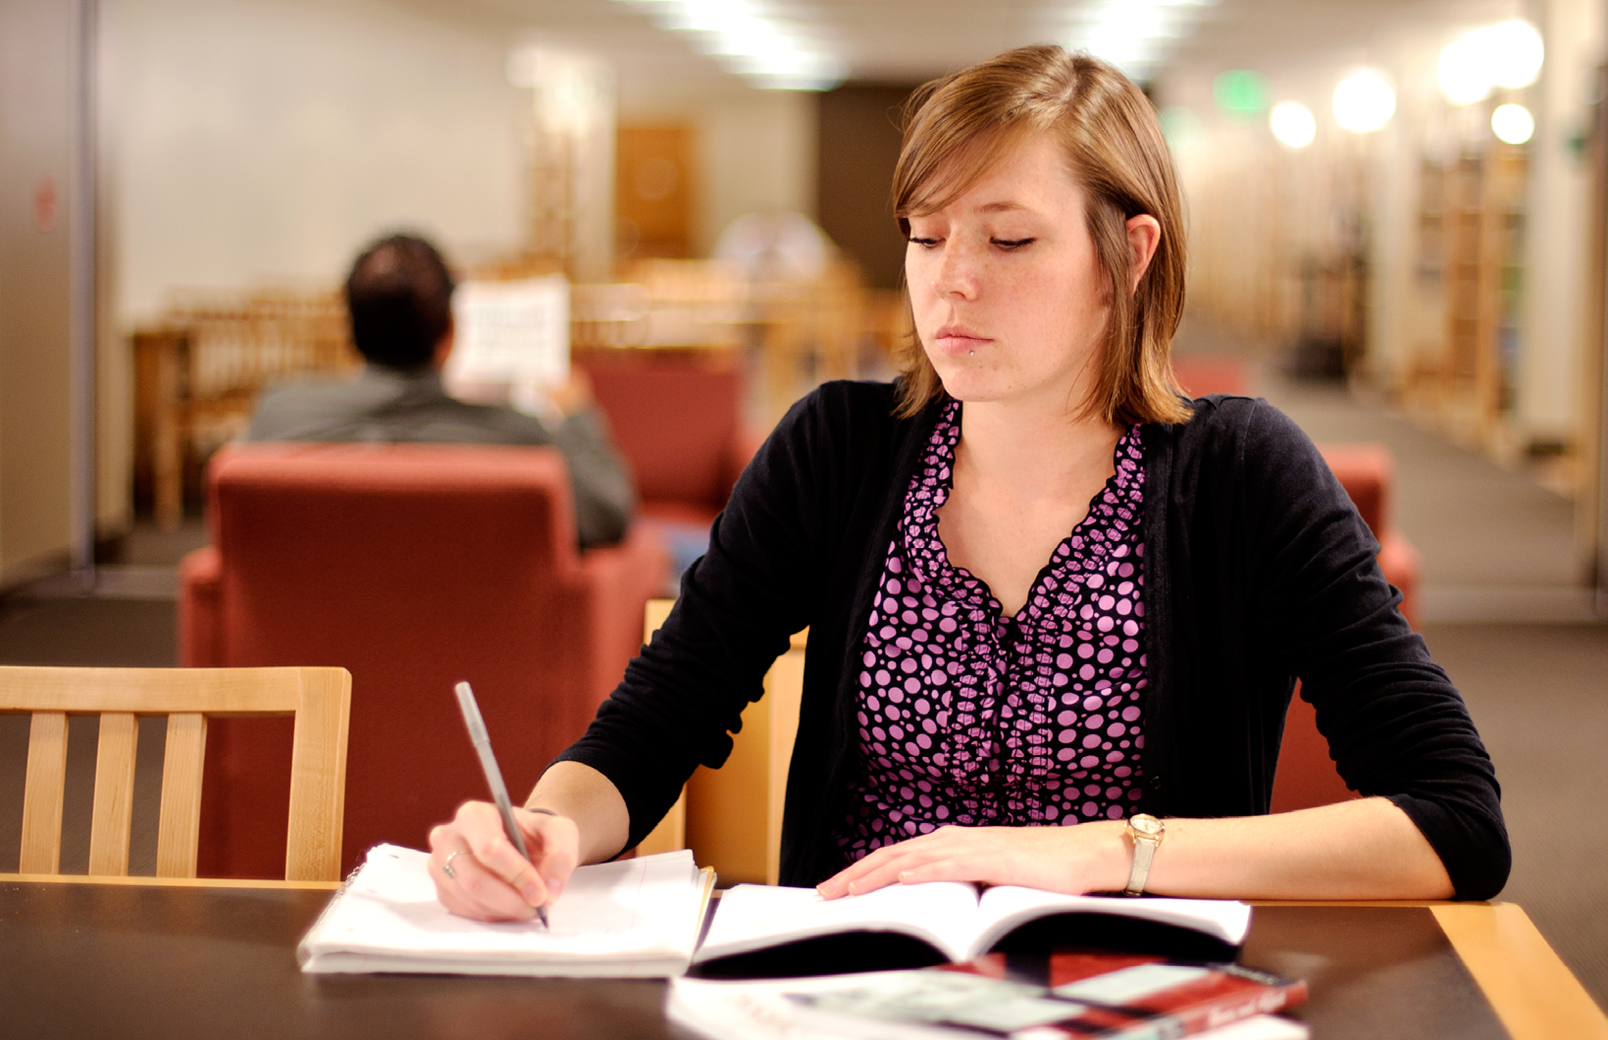 Student working in library